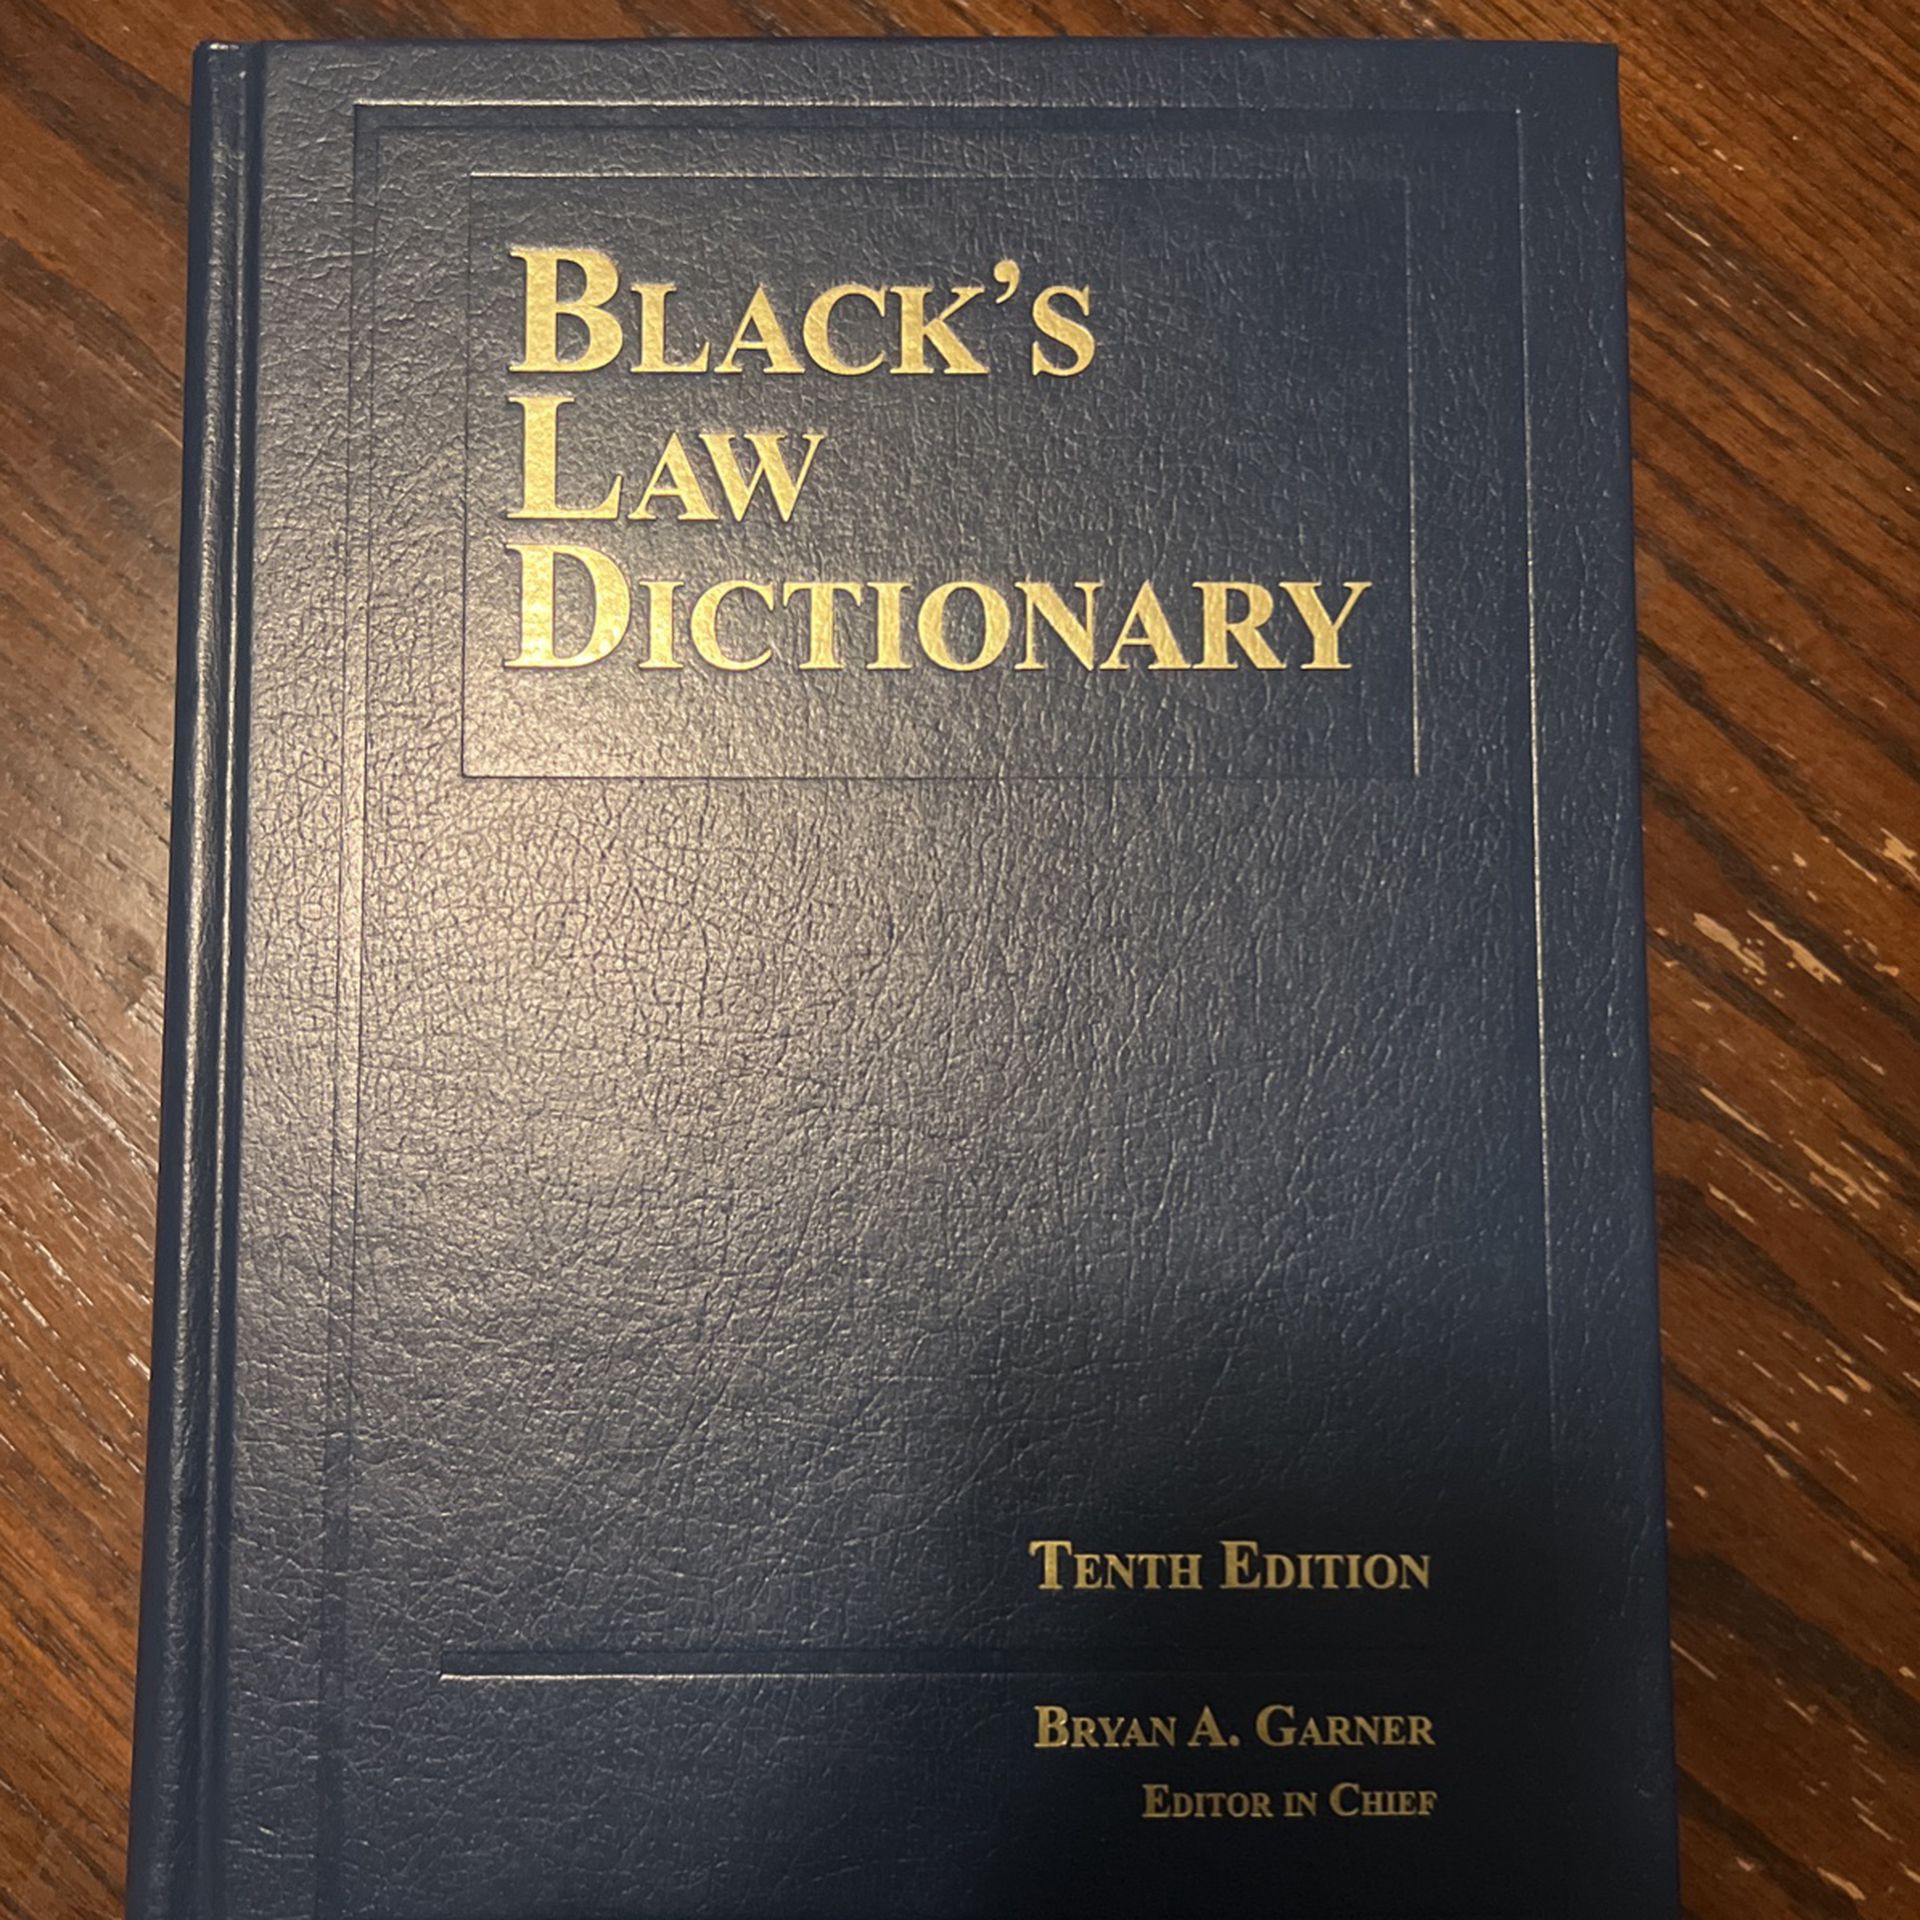 Black’s Law Dictionary- 10th Edition